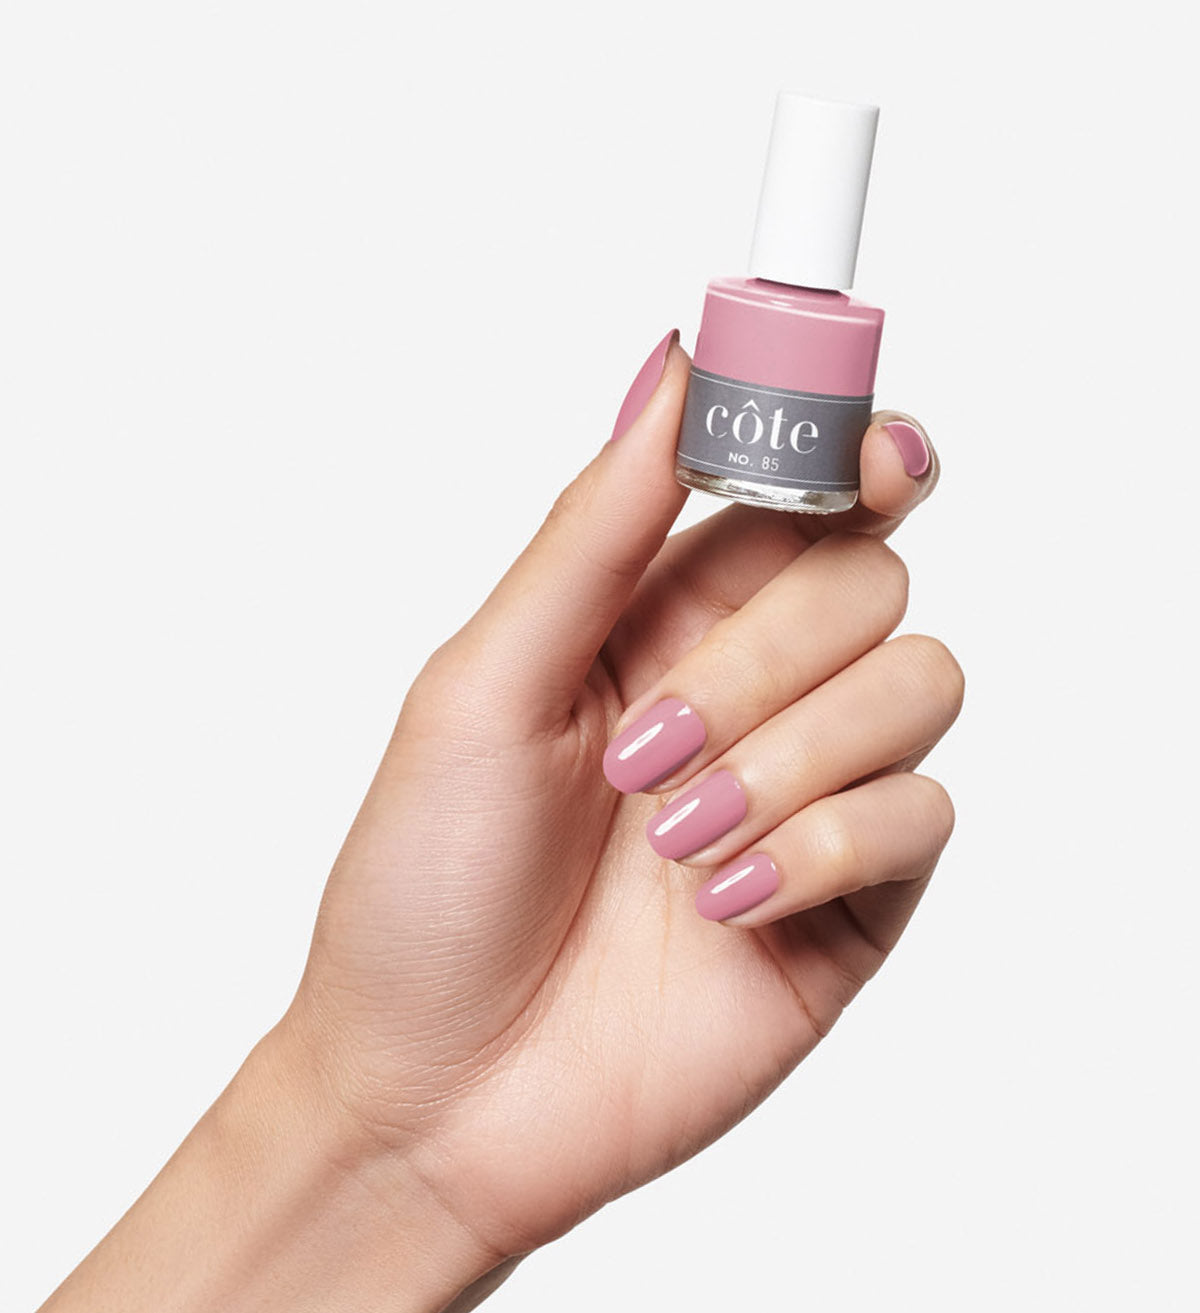 Mauve Is The New No-Polish Polish Color Upgrading Your Neutral Nails